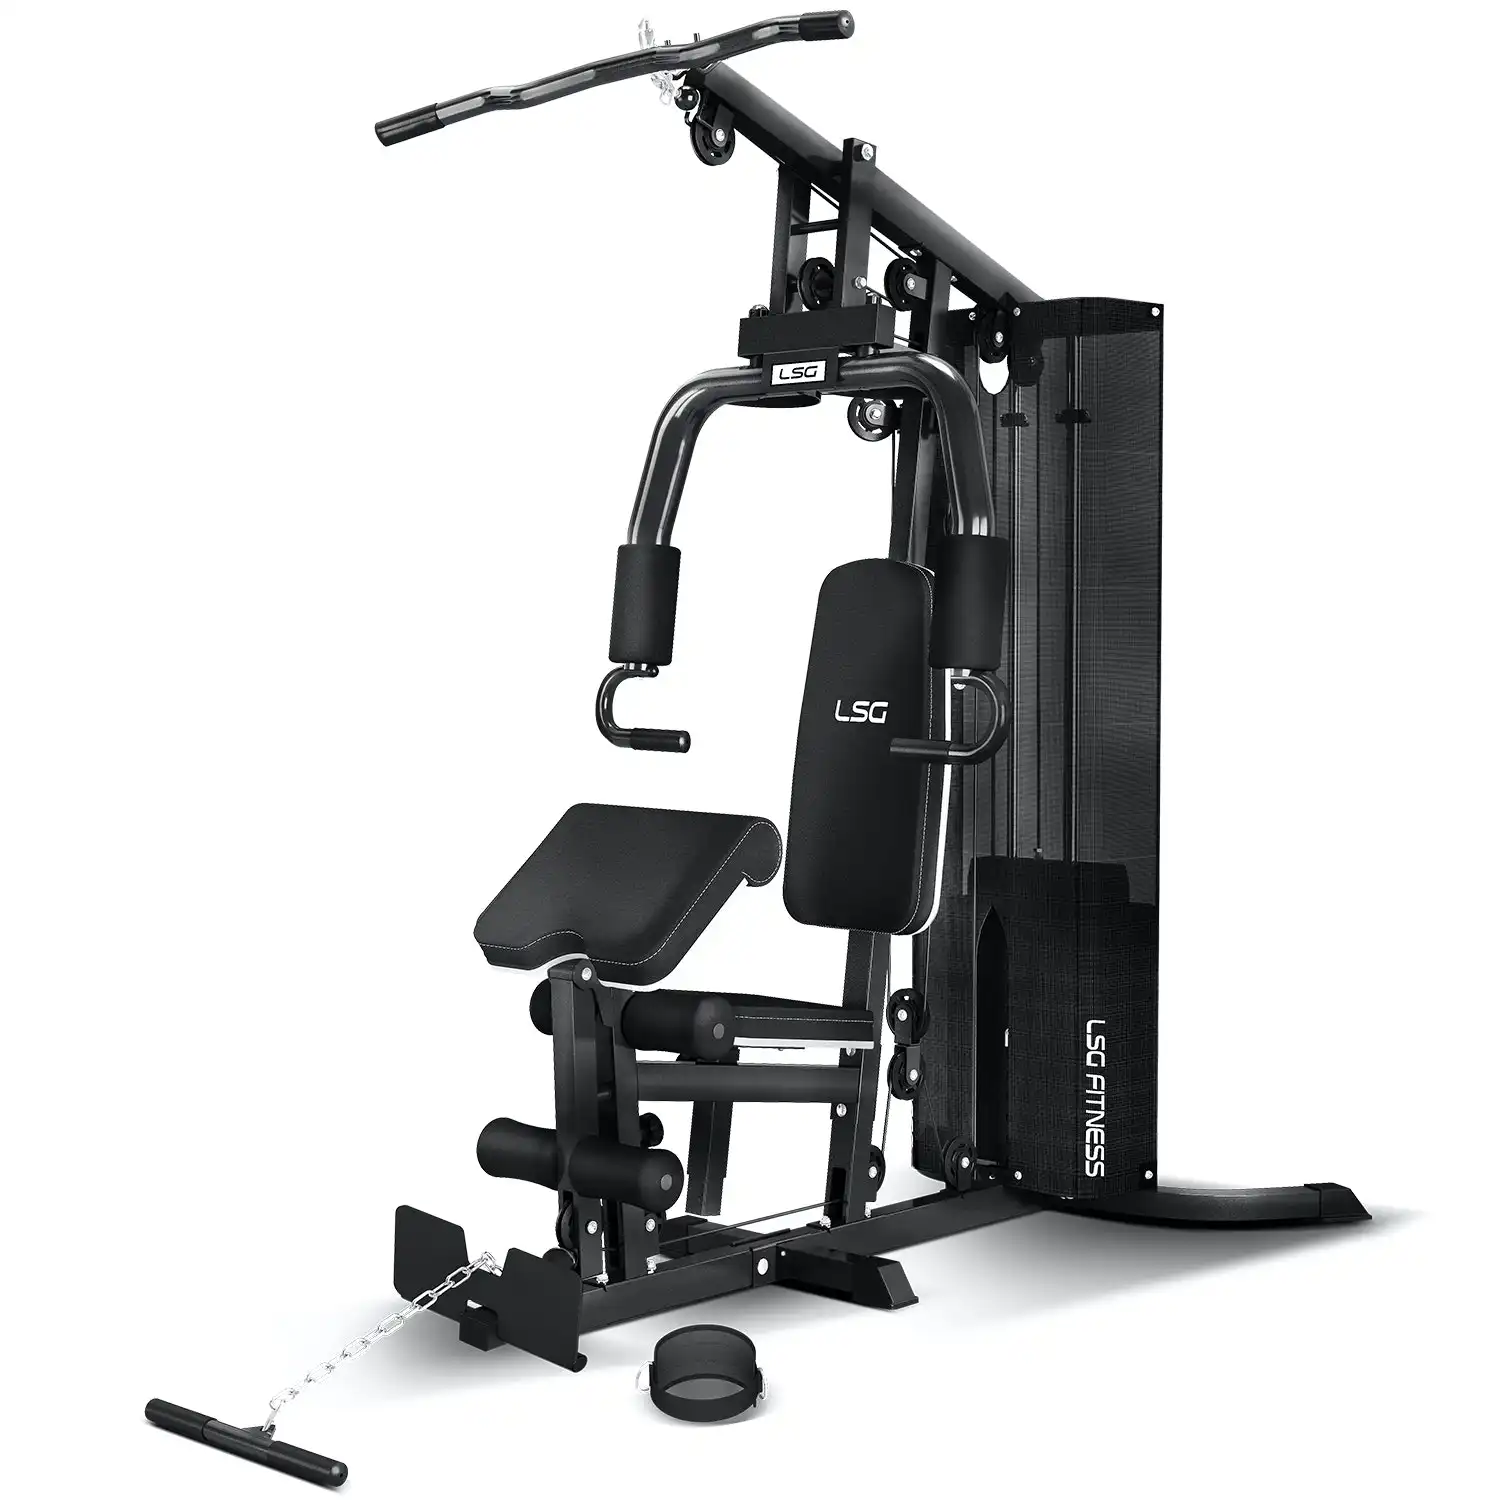 NEW LSG SSN105 All-In-One Single Gym Station Pulley Cable Machine Home Gym 74kg